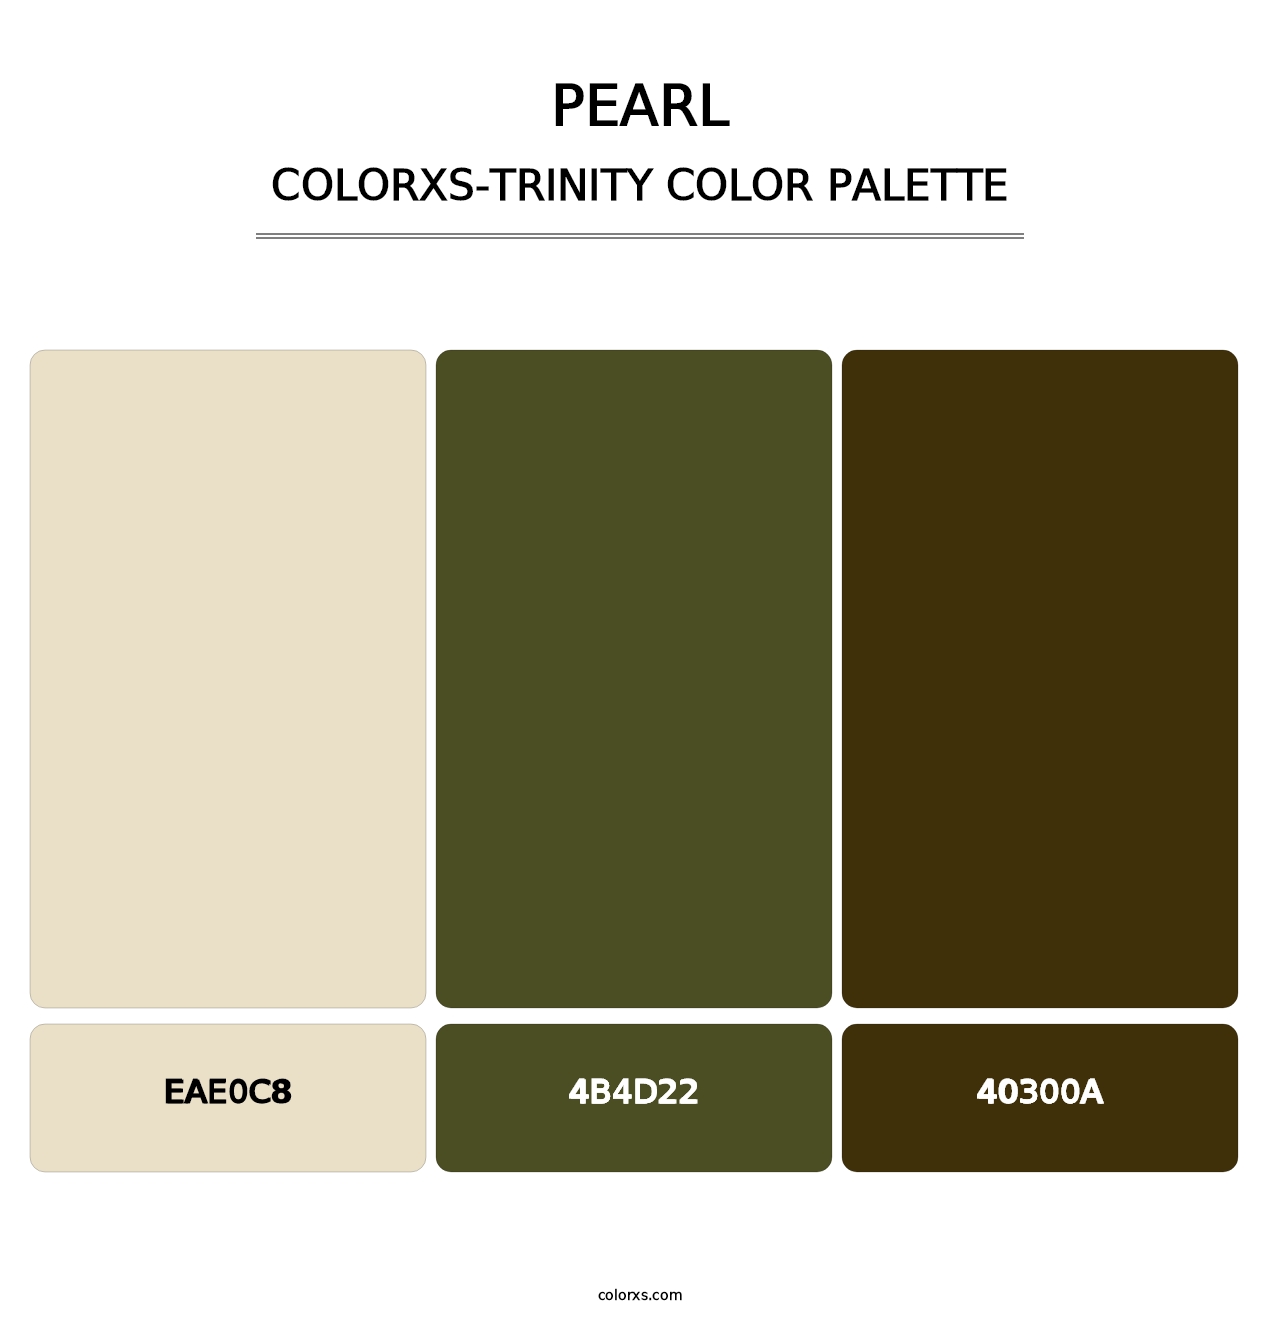 Pearl - Colorxs Trinity Palette